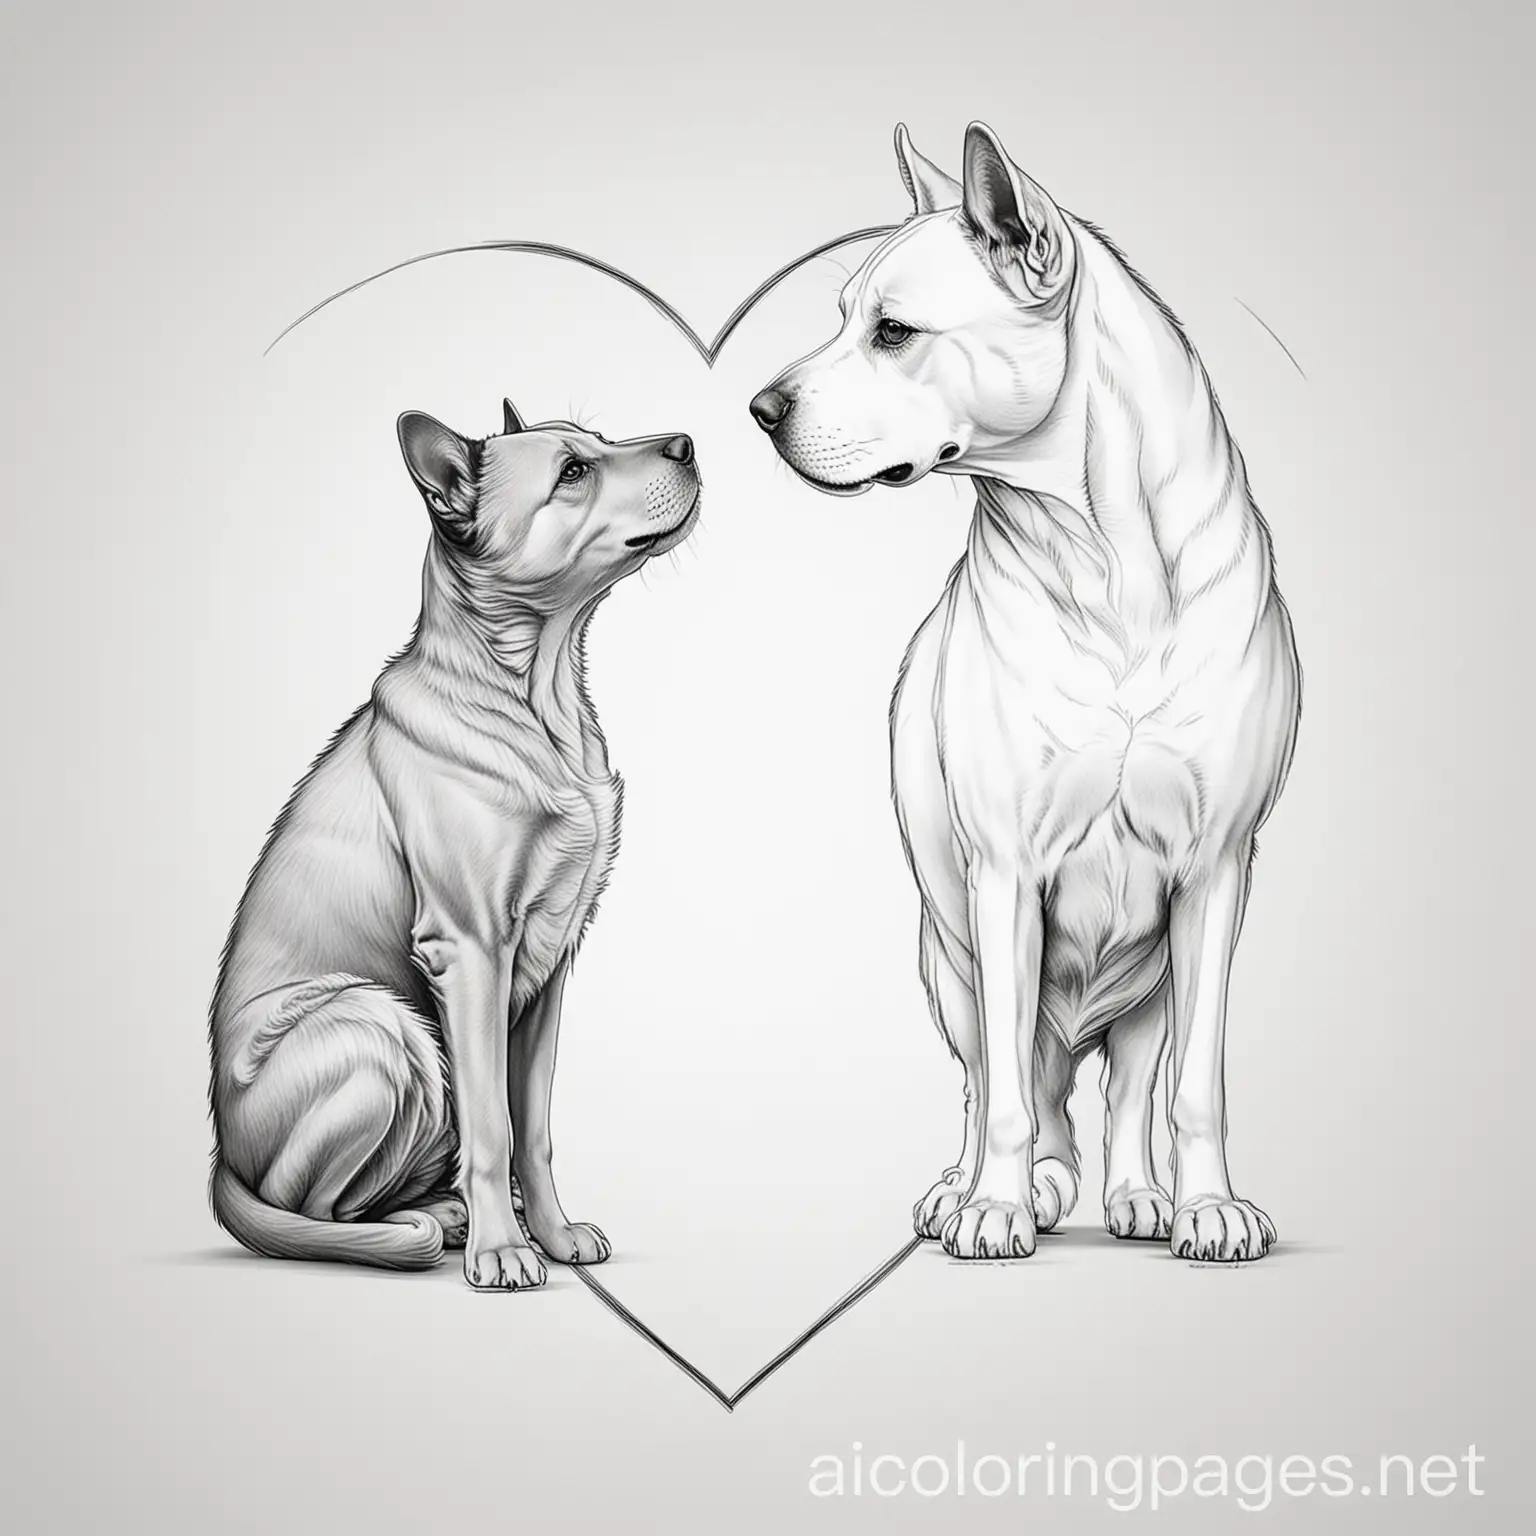 dog and cat where the dogs body and the cats body each form half the shape of a heart, Coloring Page, black and white, line art, white background, Simplicity, Ample White Space